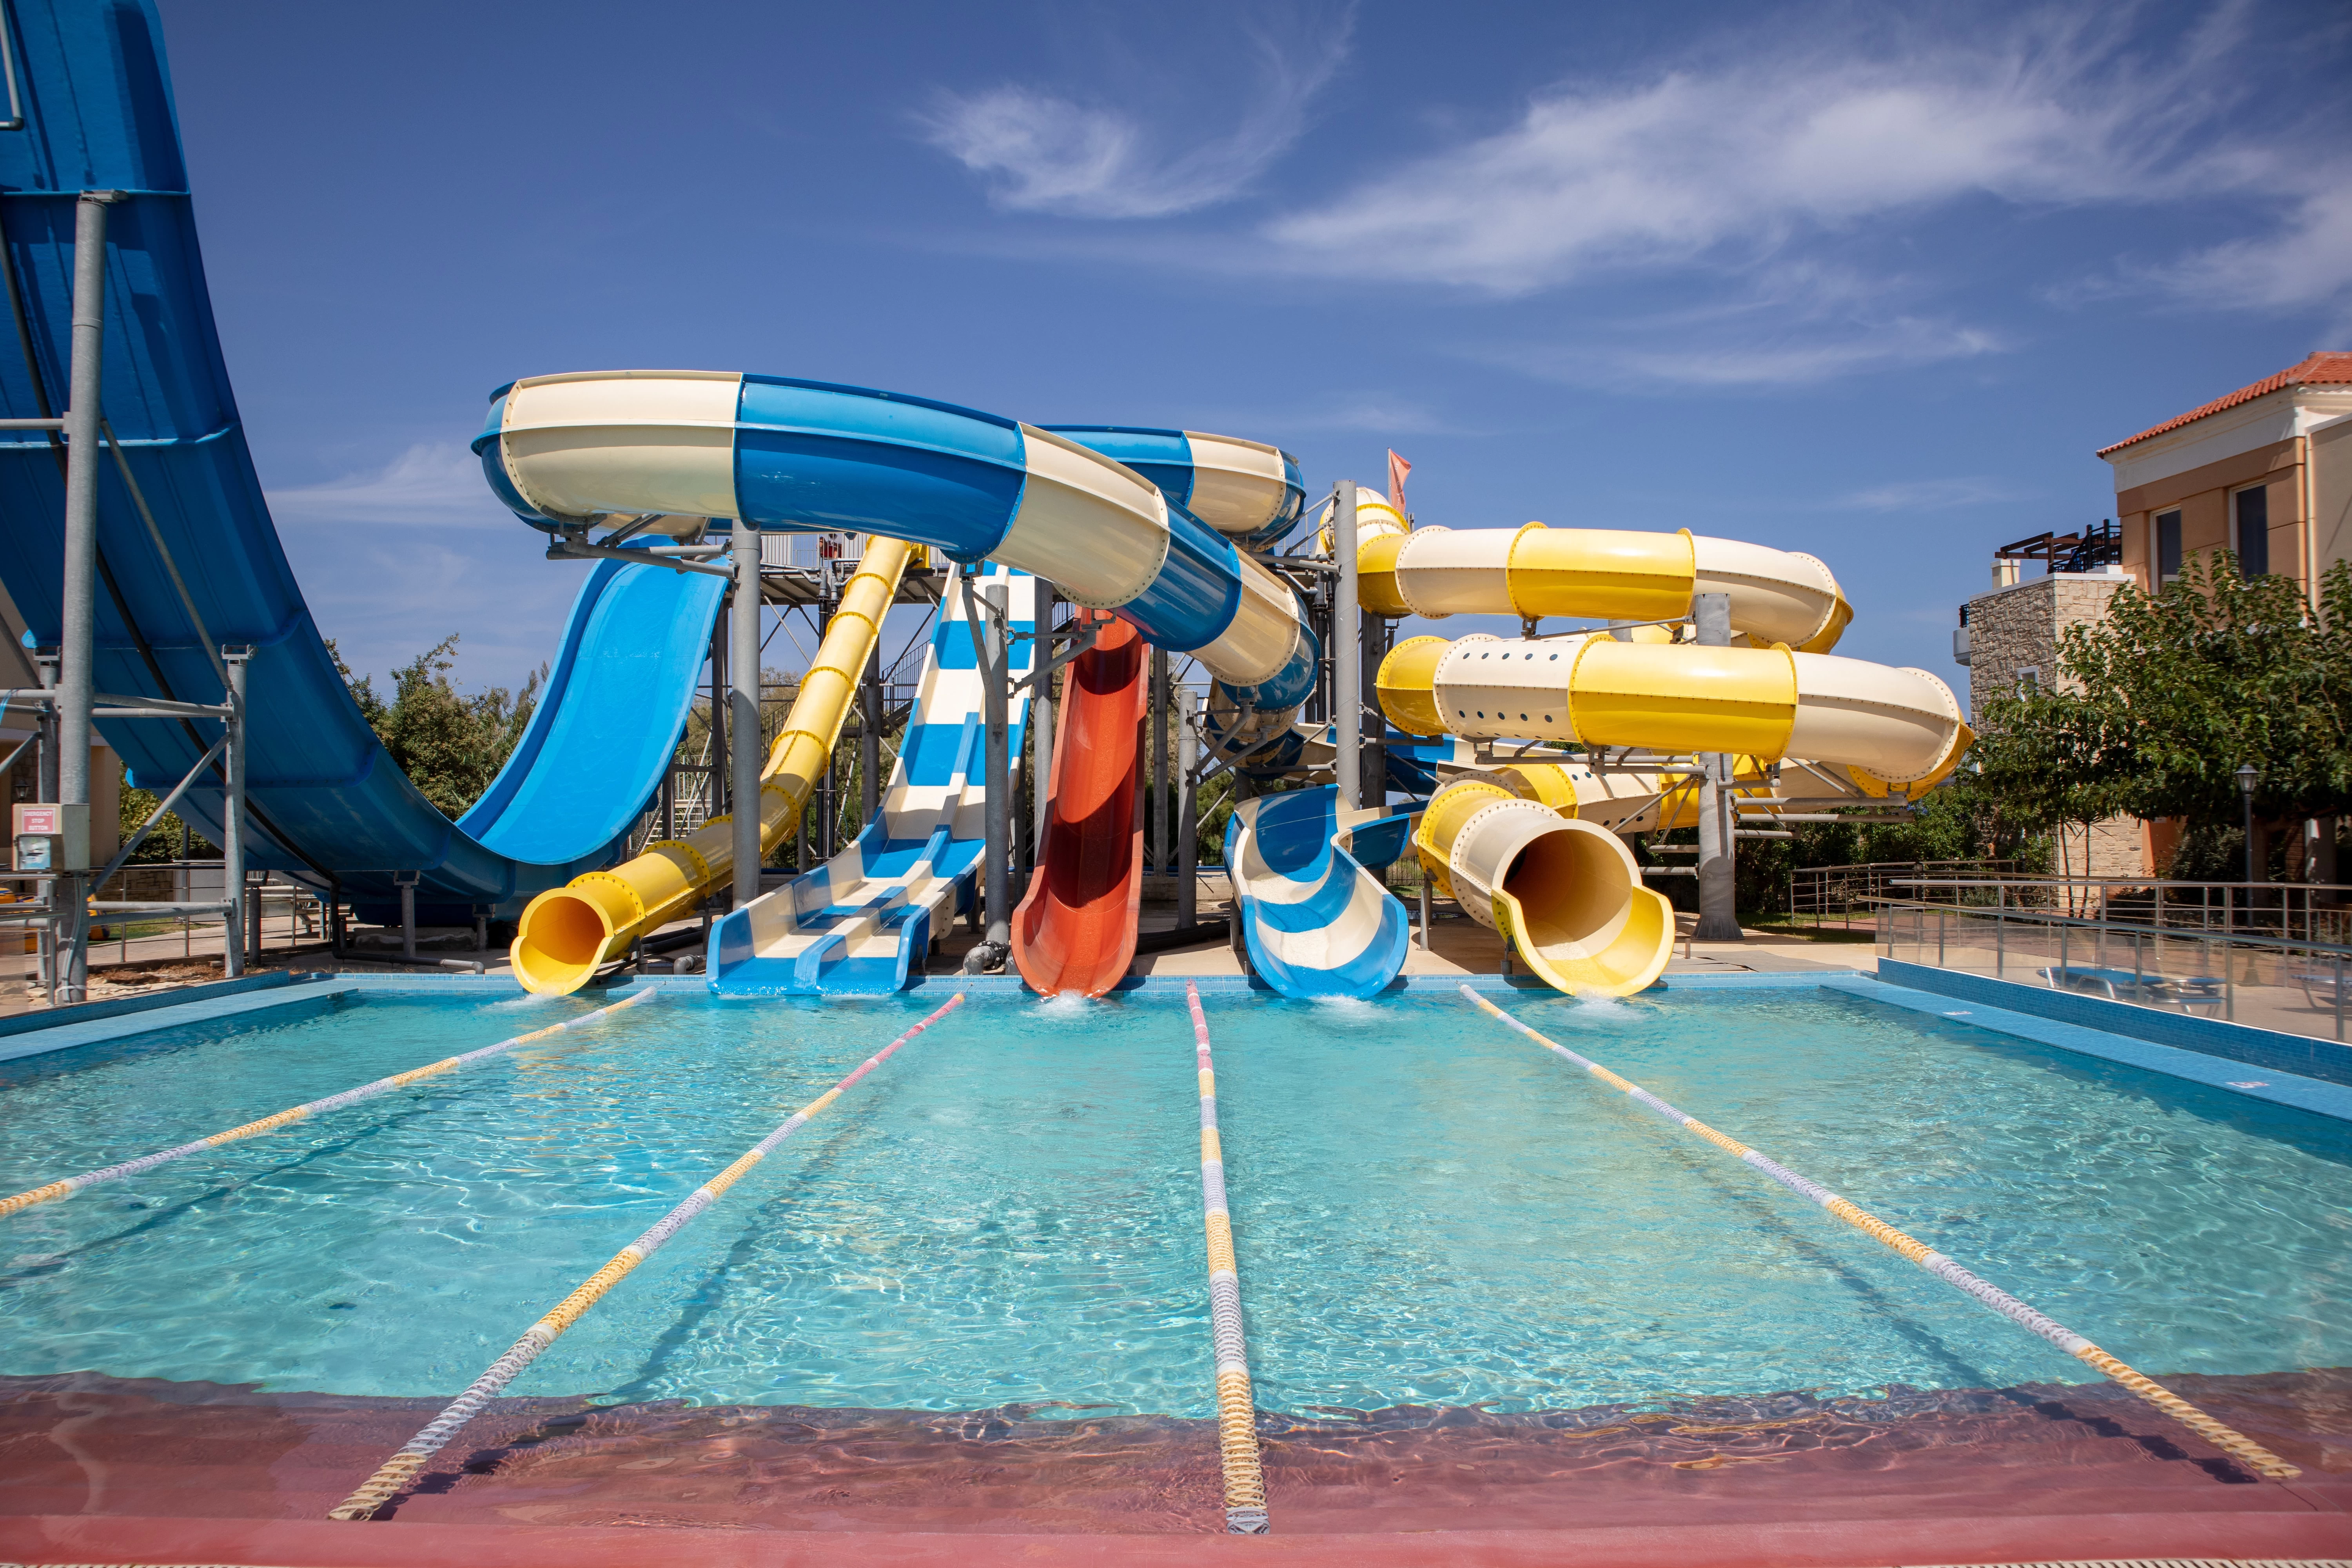 Four tunnel slides at an empty waterpark in Southwest Florida